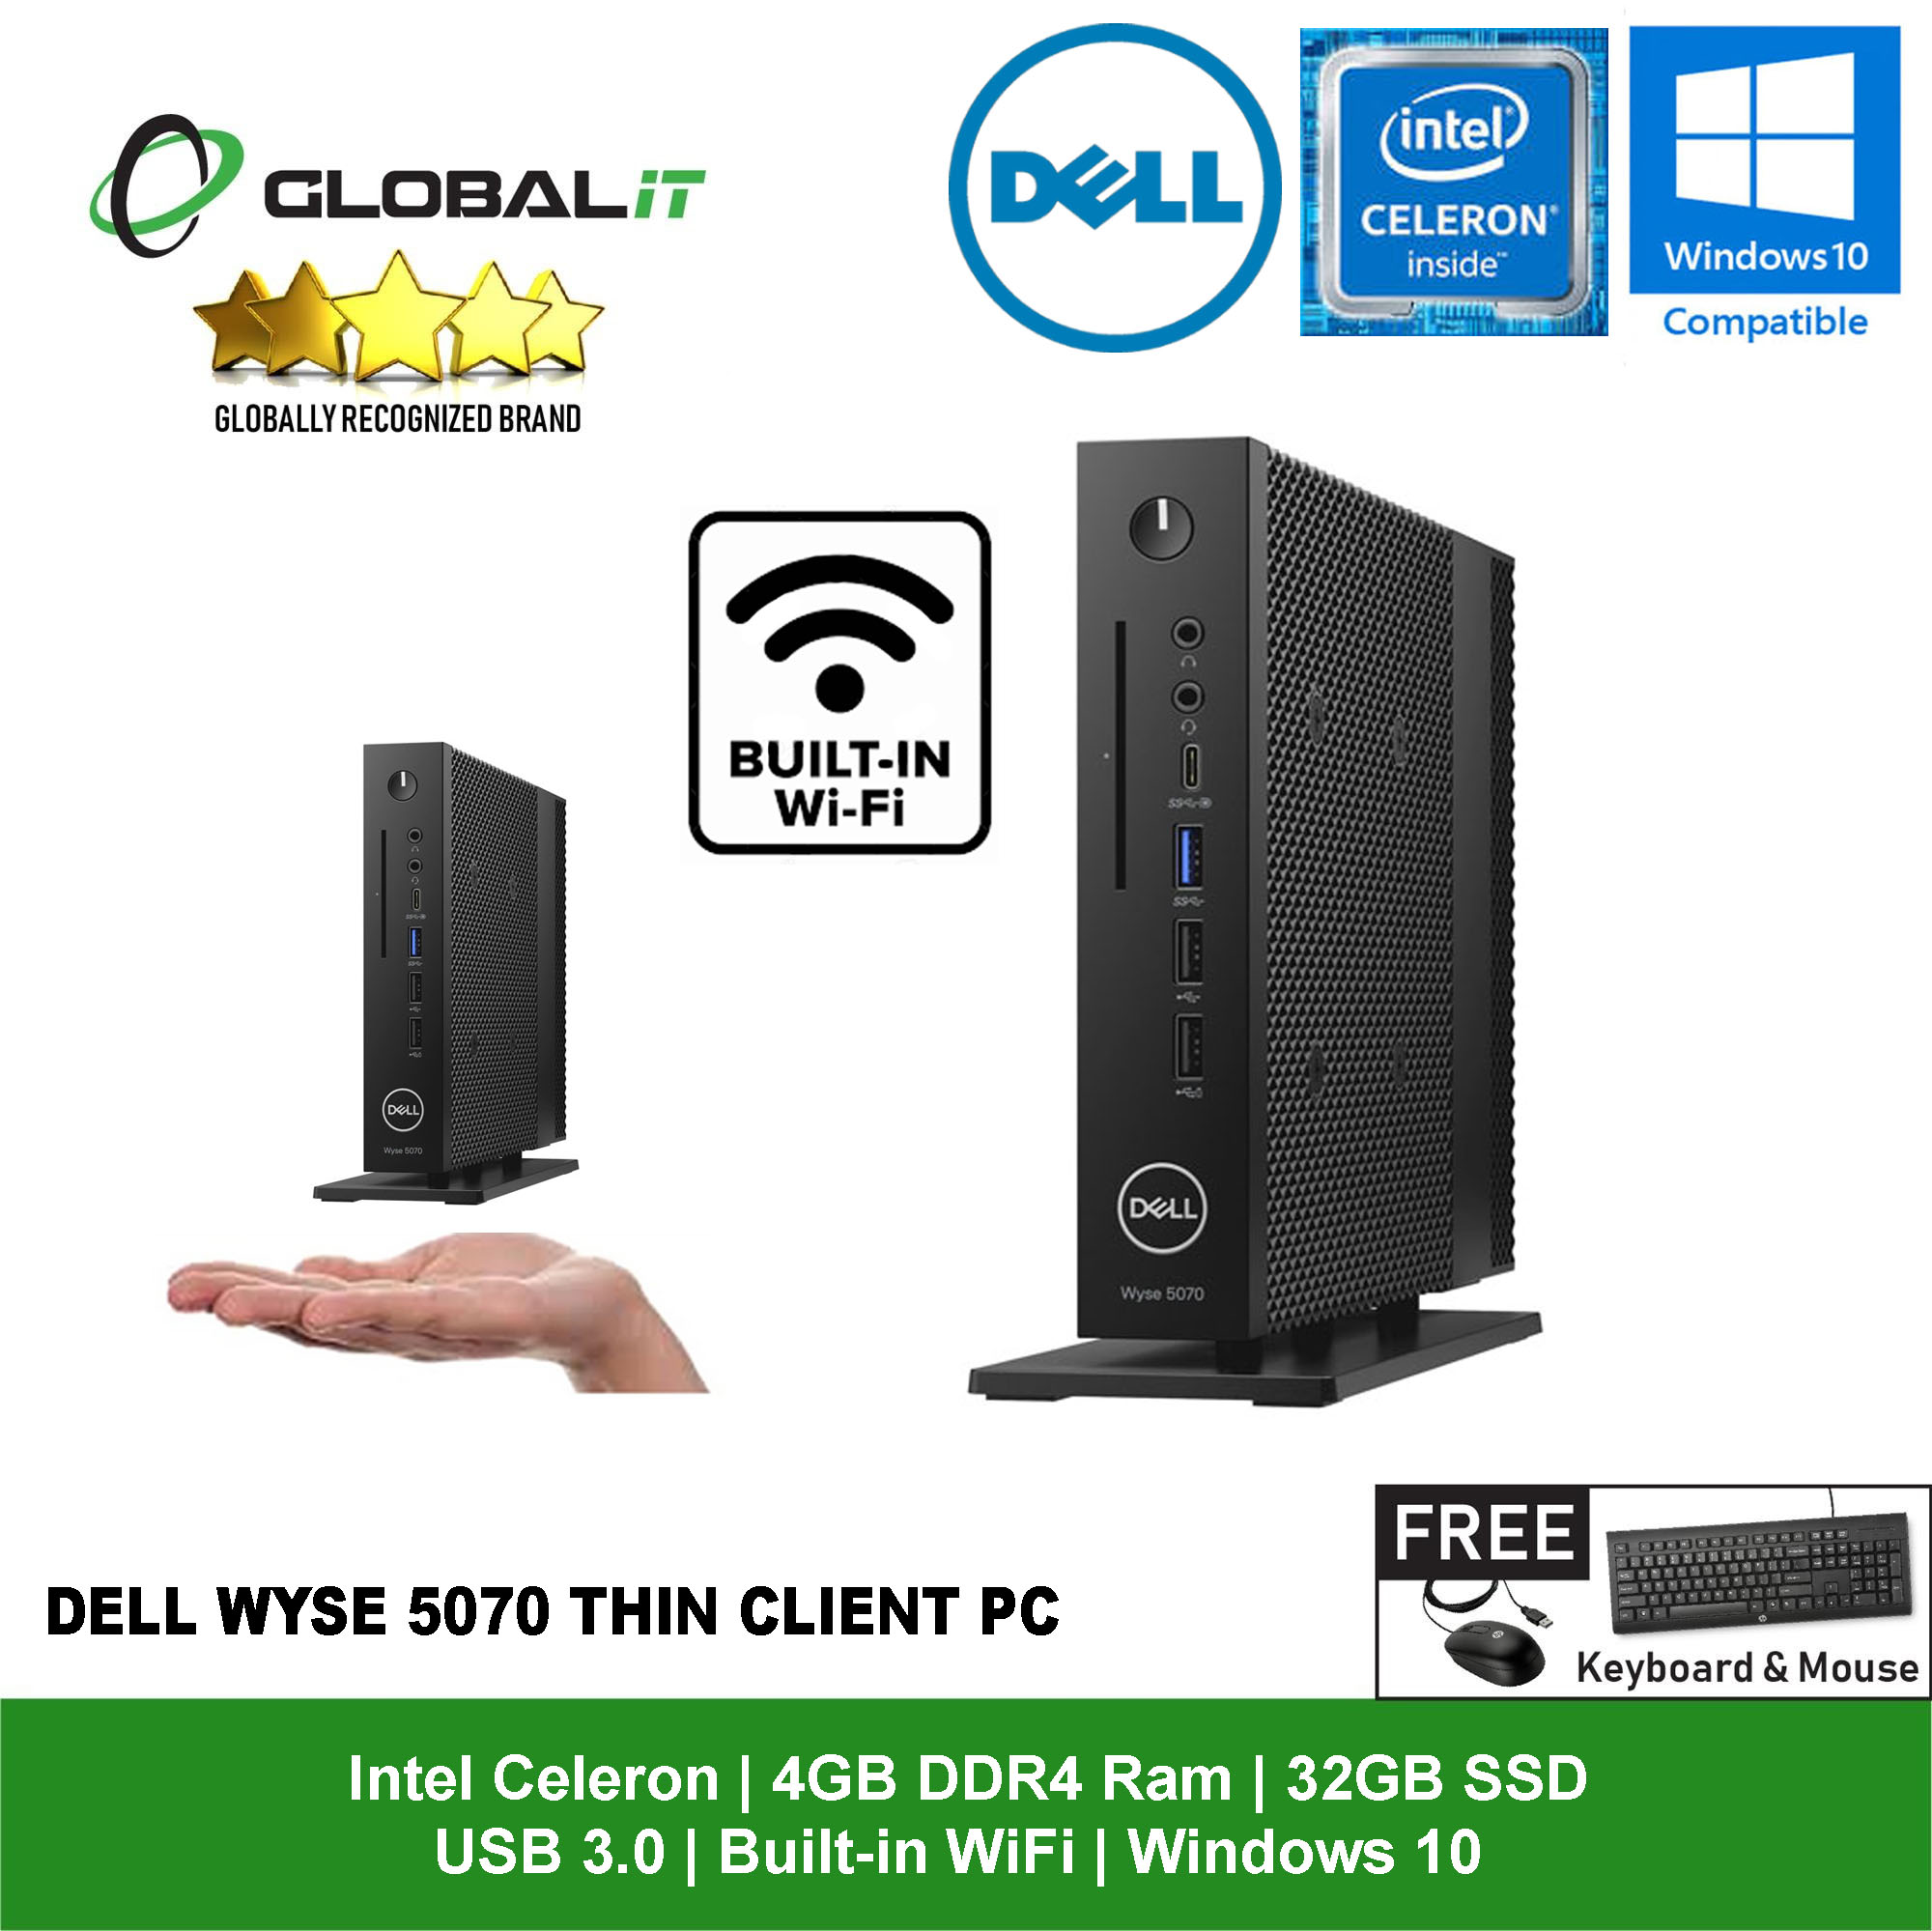 Dell Wyse 5070 Thin Client PC Intel Celeron / Windows 10 (Refurbished) -  Global Group